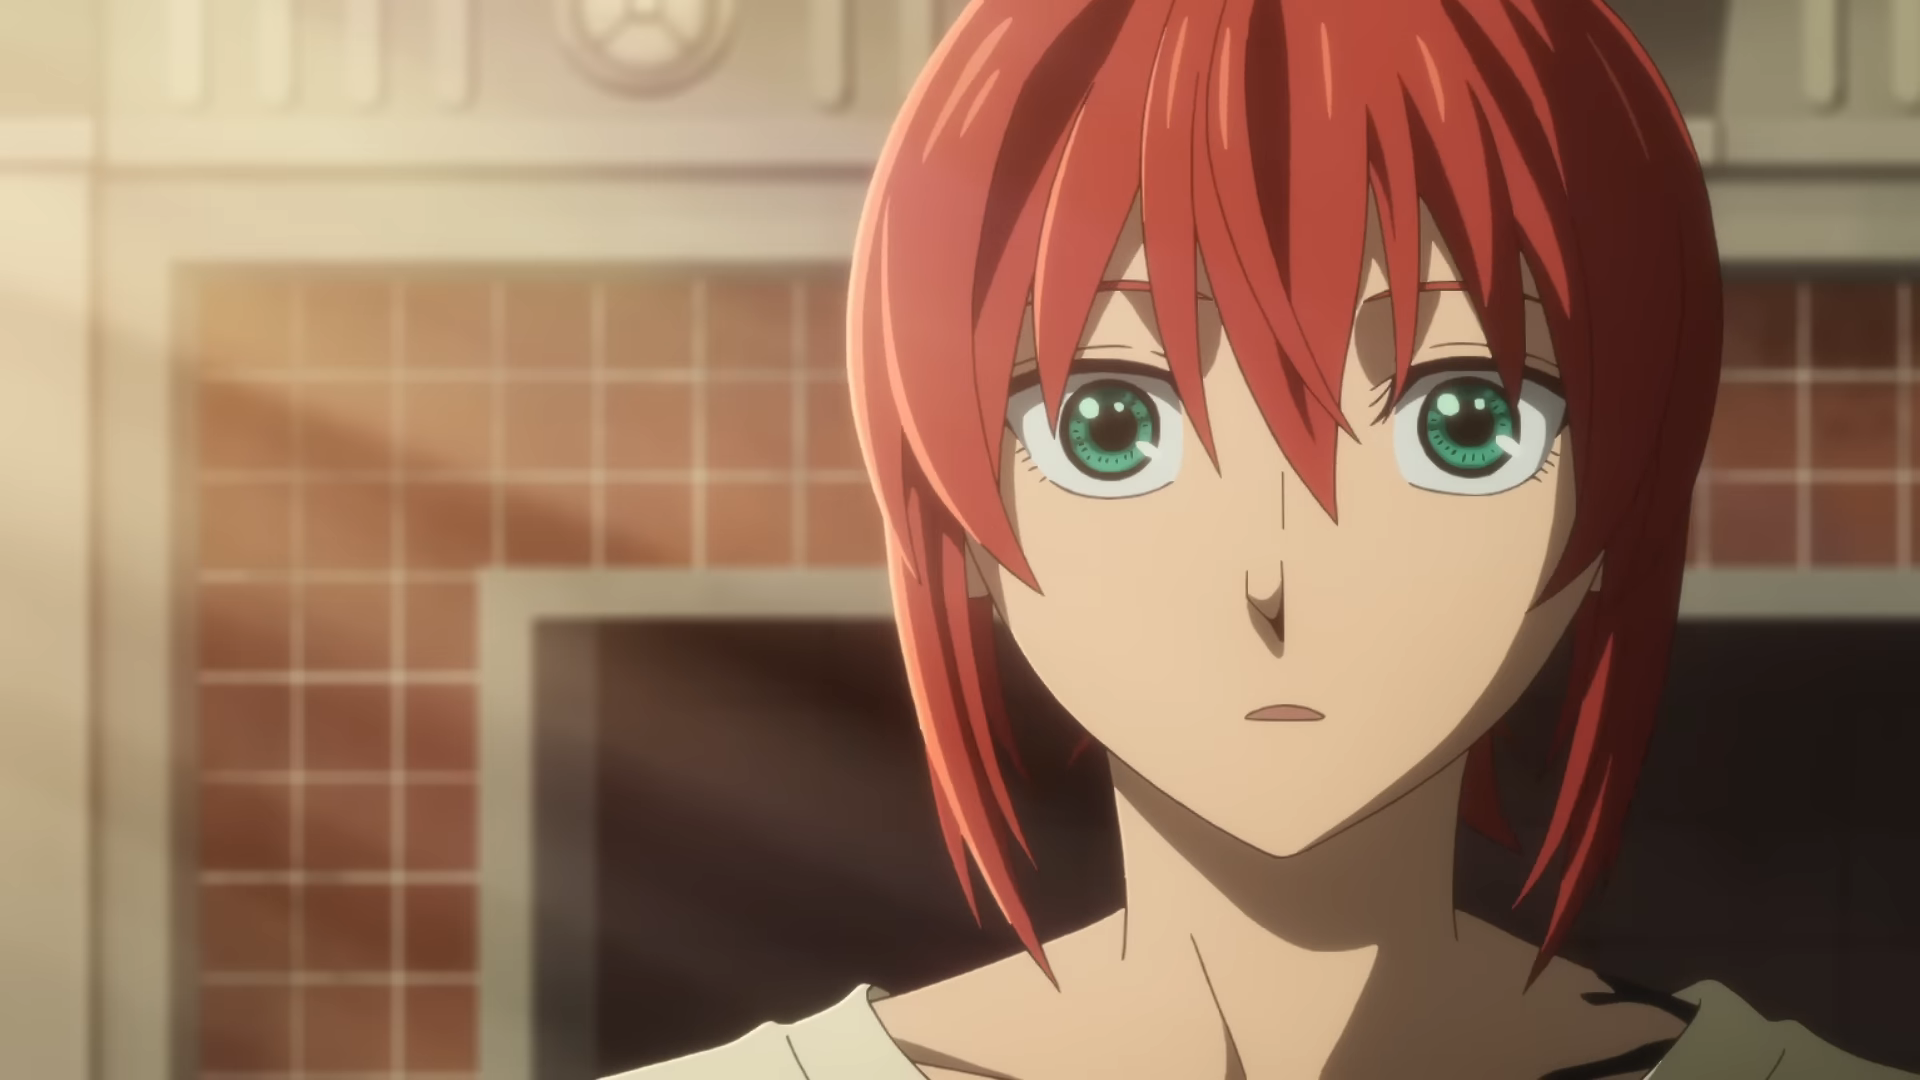 1. Chise Hatori from "The Ancient Magus' Bride" - wide 6